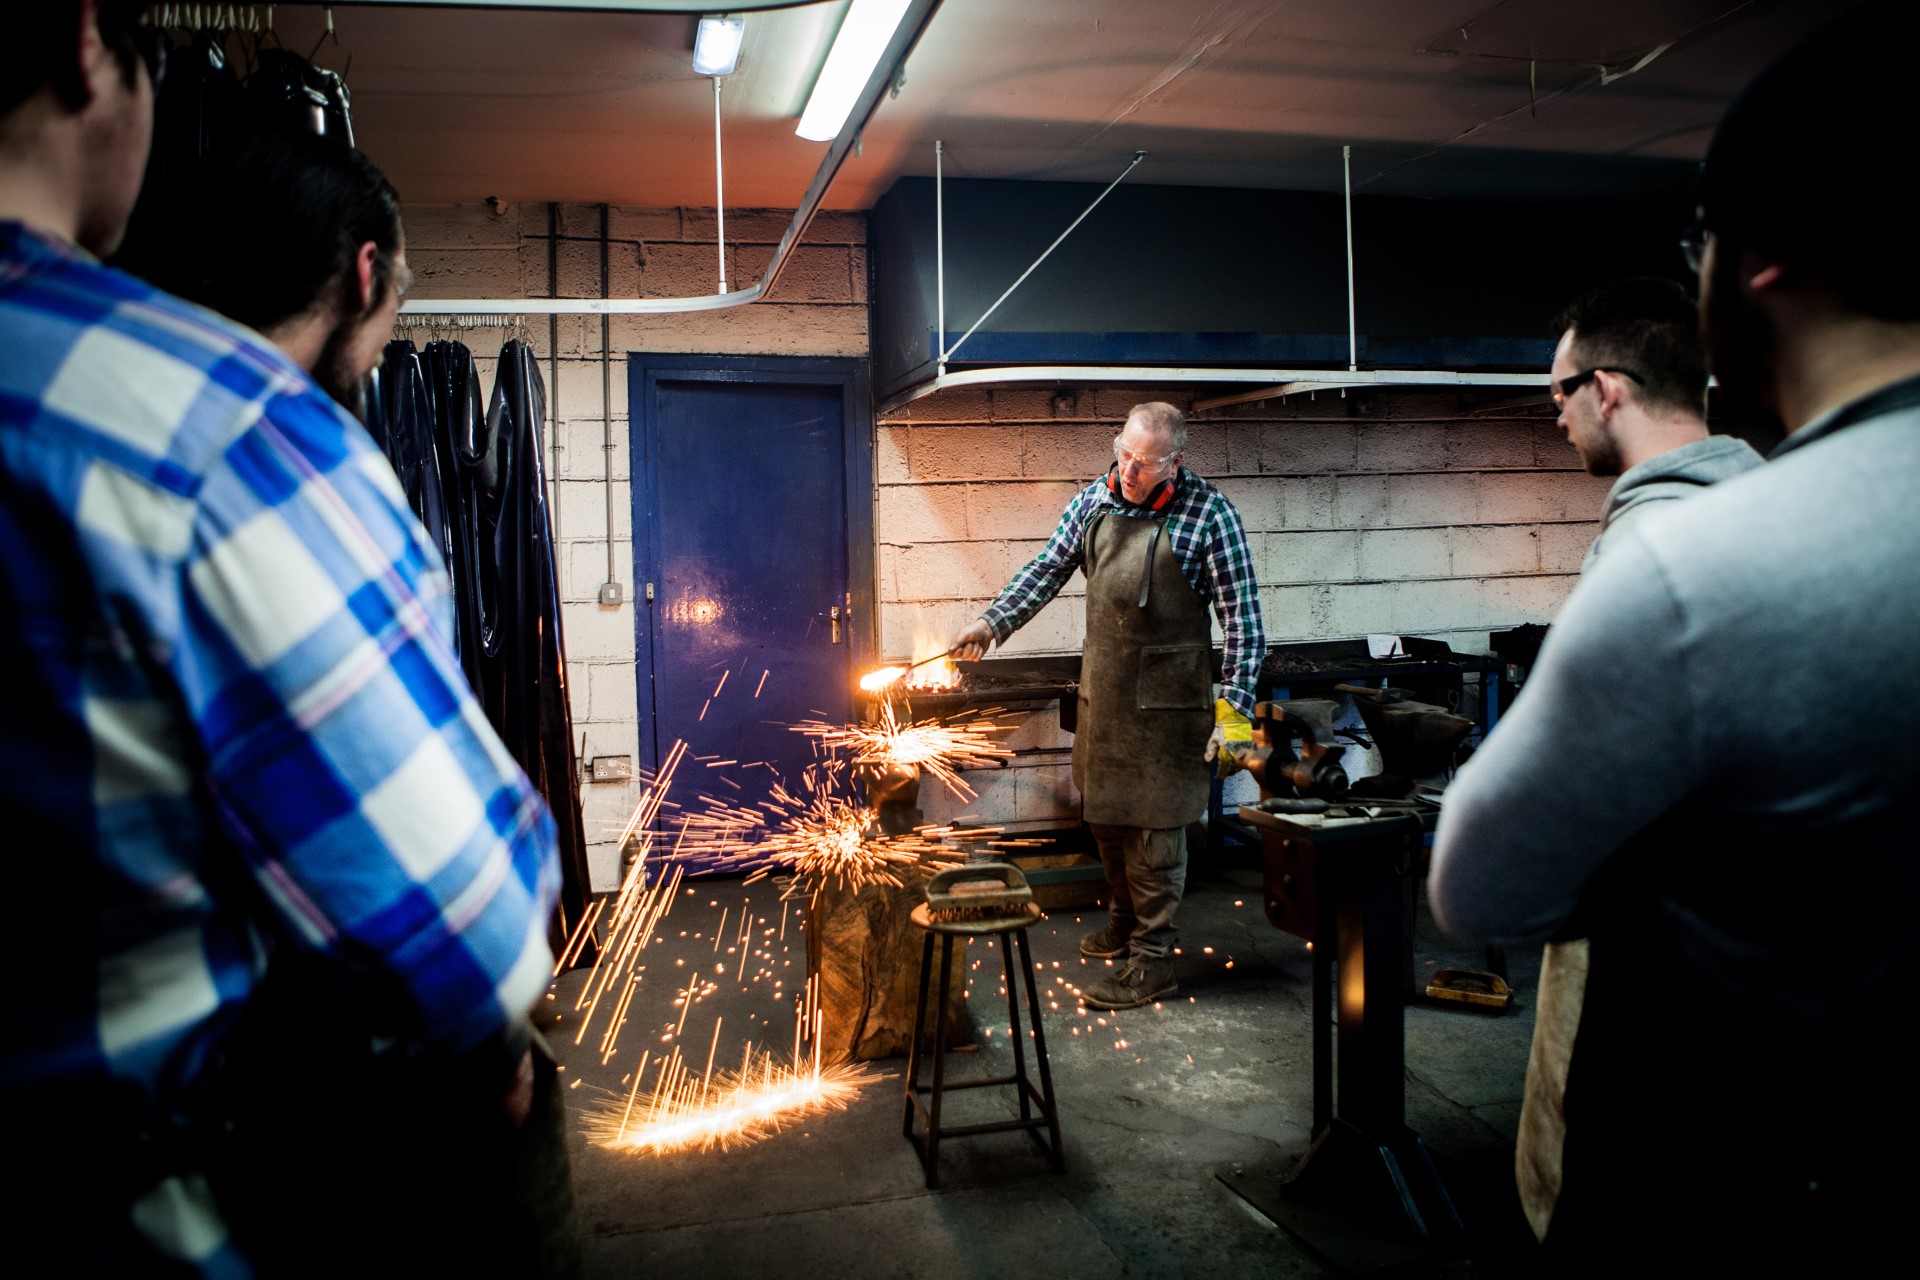 More College of FET Blacksmithing learners graduate this September at Ireland’s only City and Guilds certified training course in Cappamore